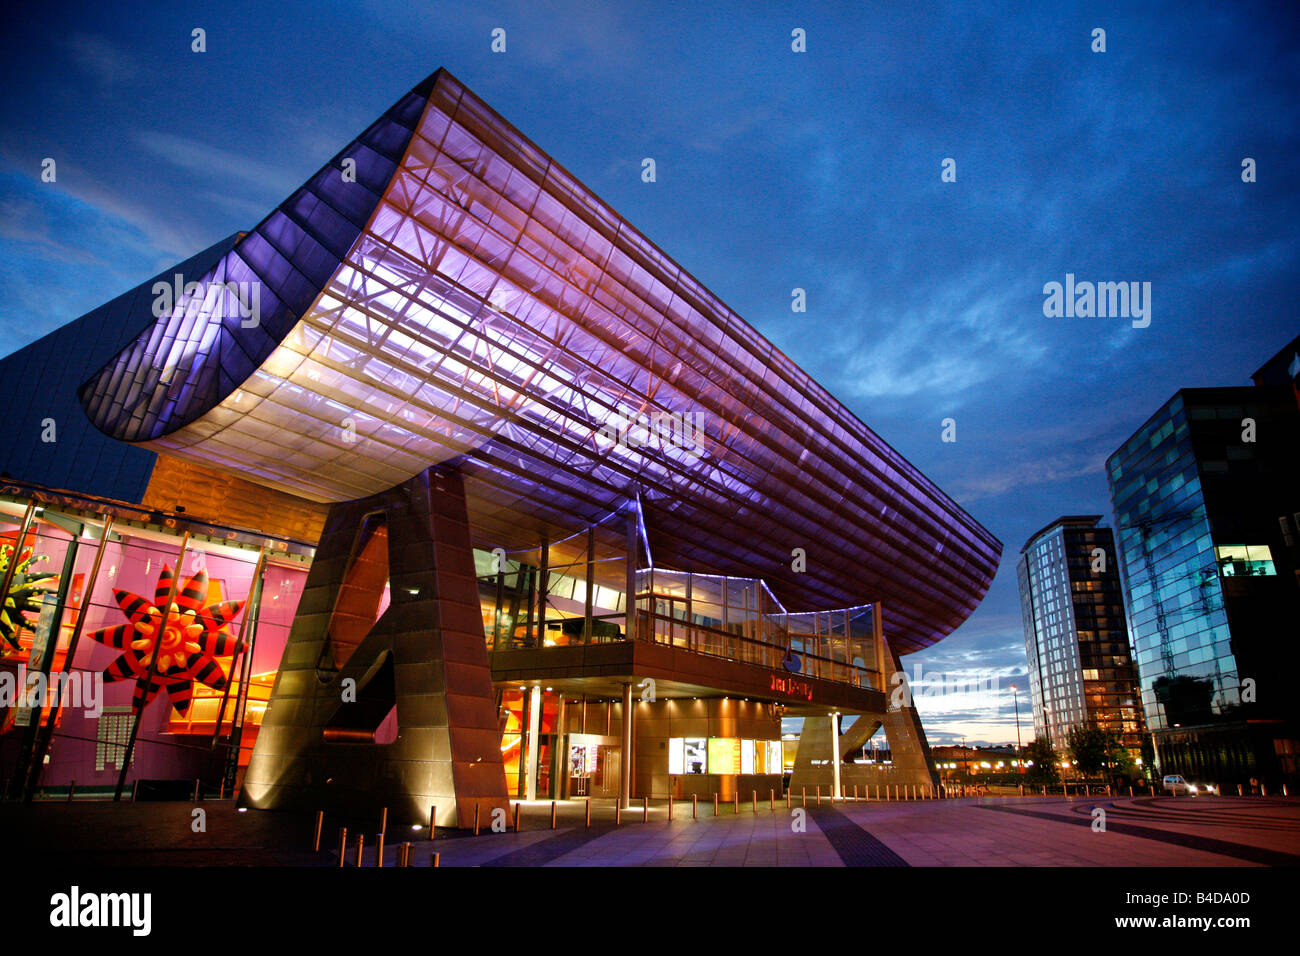 August 2008 - die Lowry in Salford Quays Manchester England UK Stockfoto